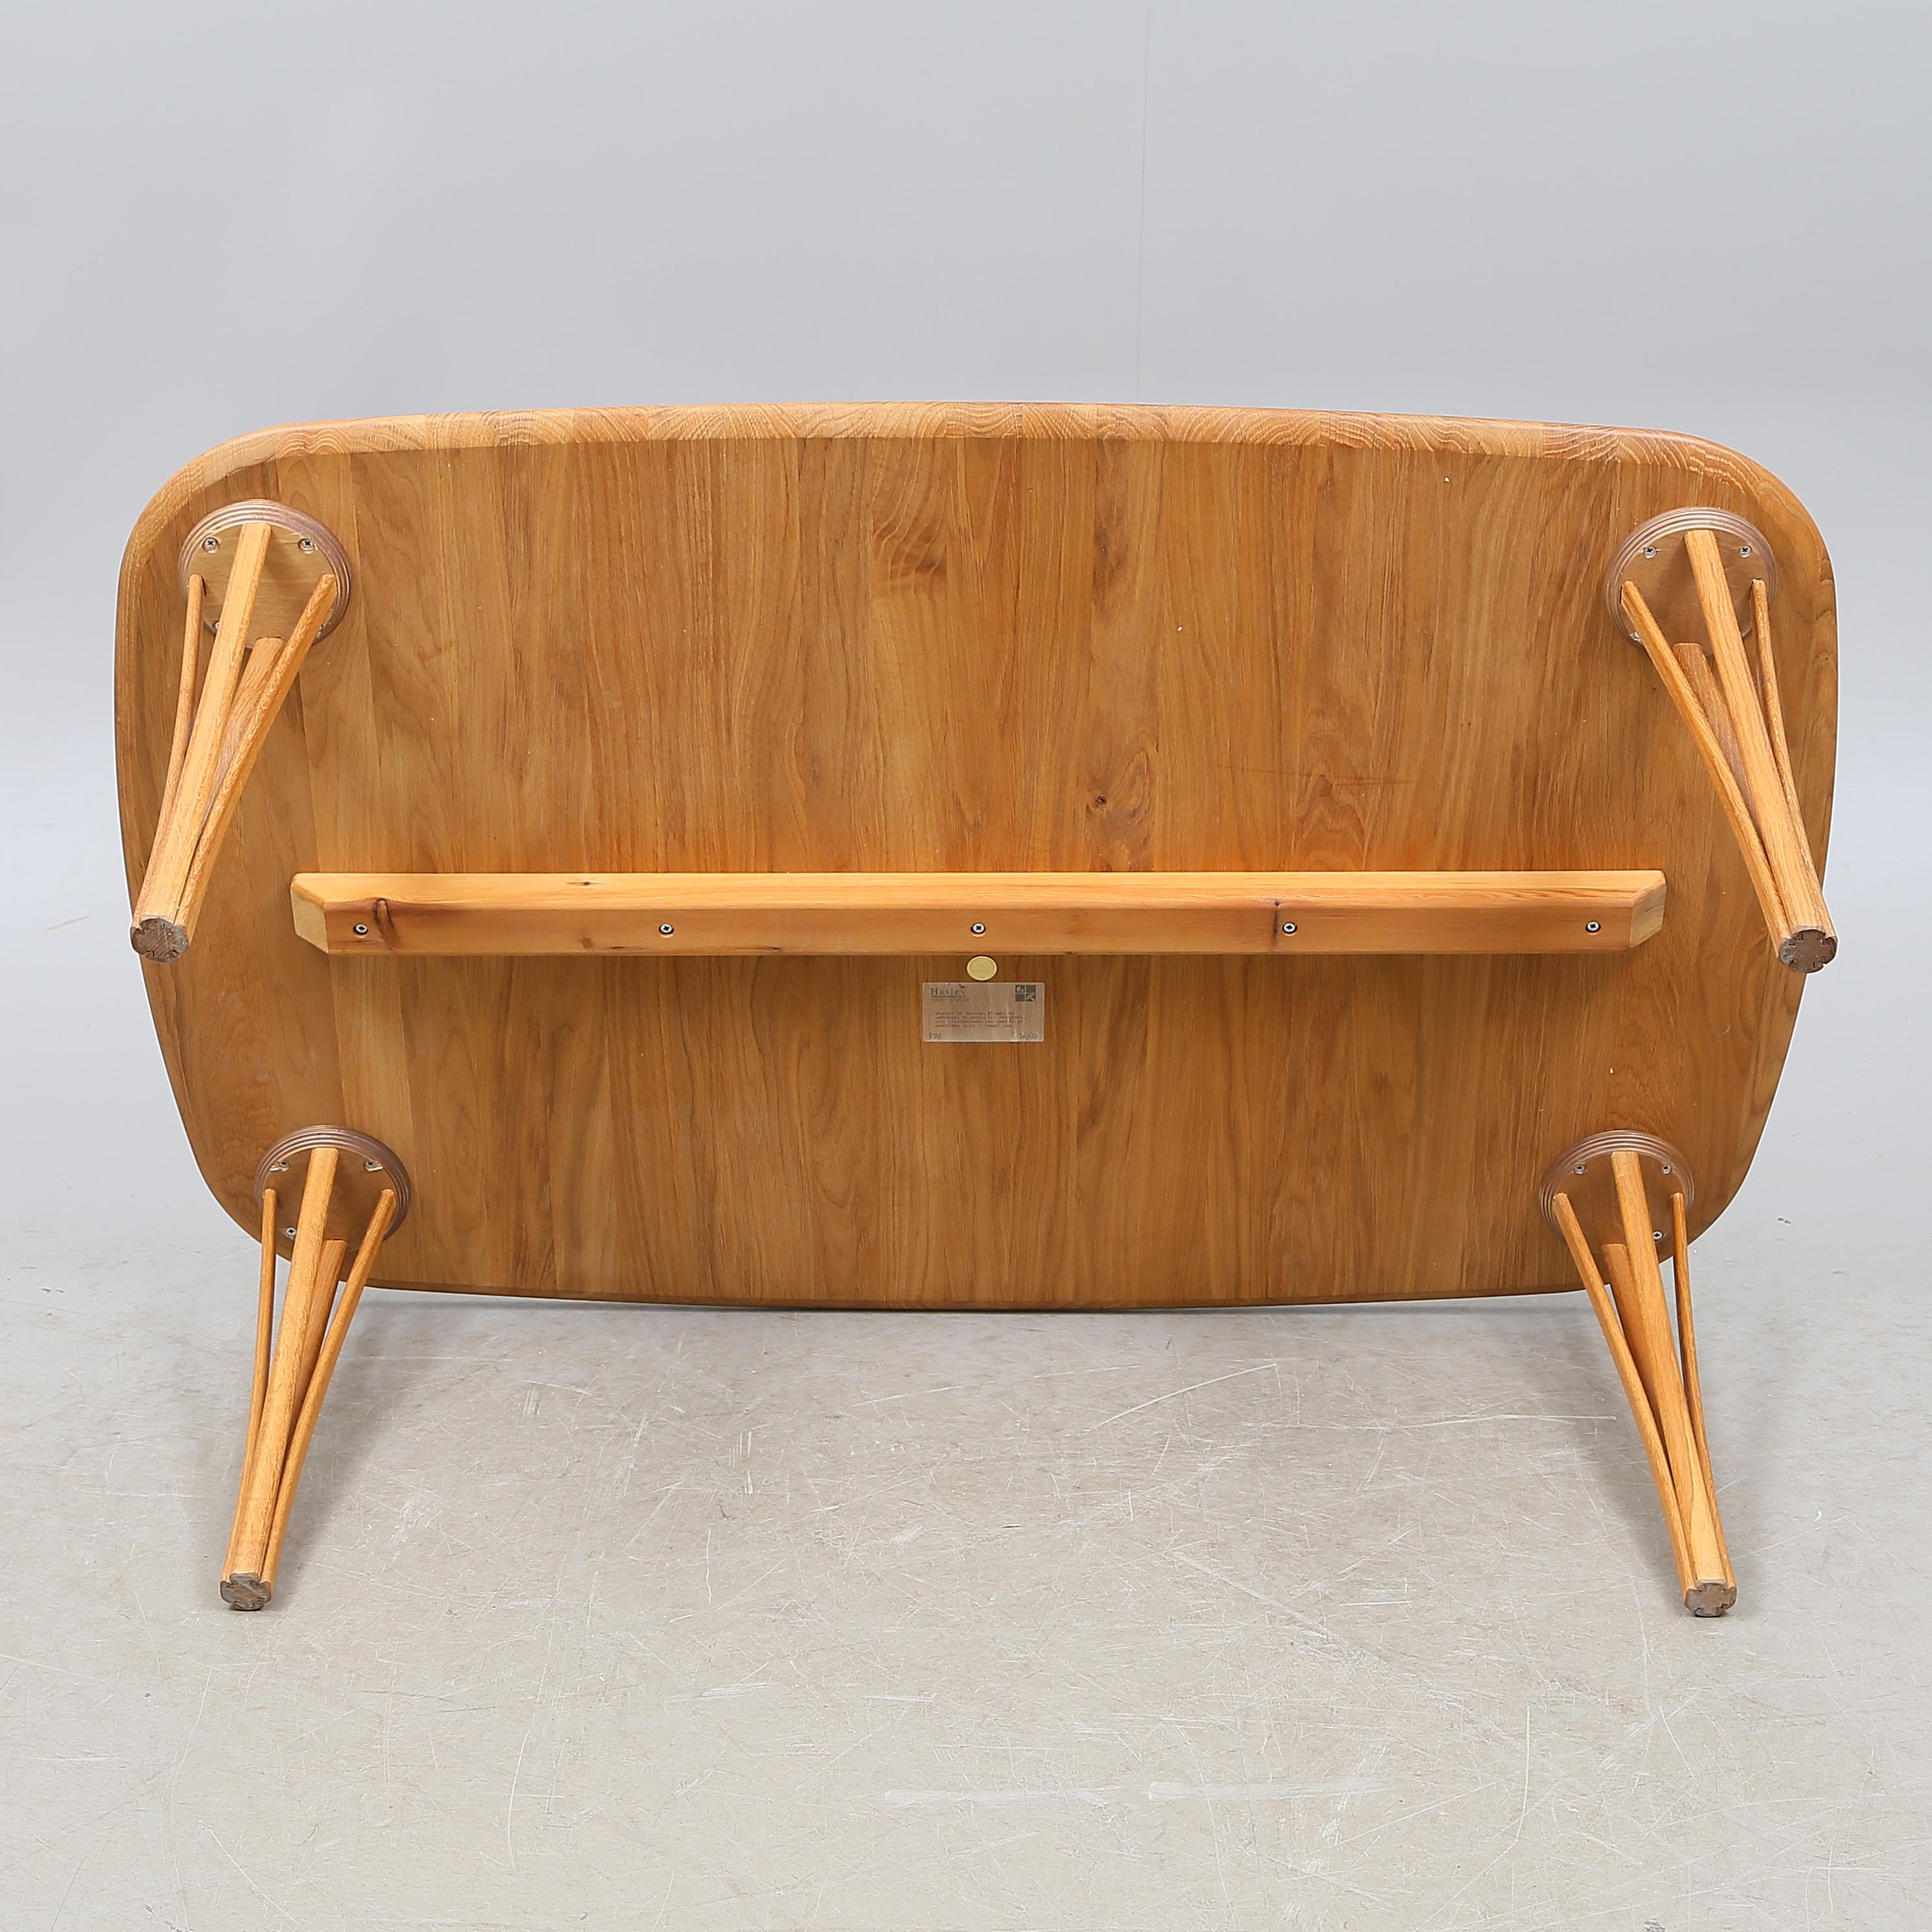 A sofa/coffee table with beech top and legs in Ash wood from 1984. 

More images, close-ups and detailed condition report available upon request.